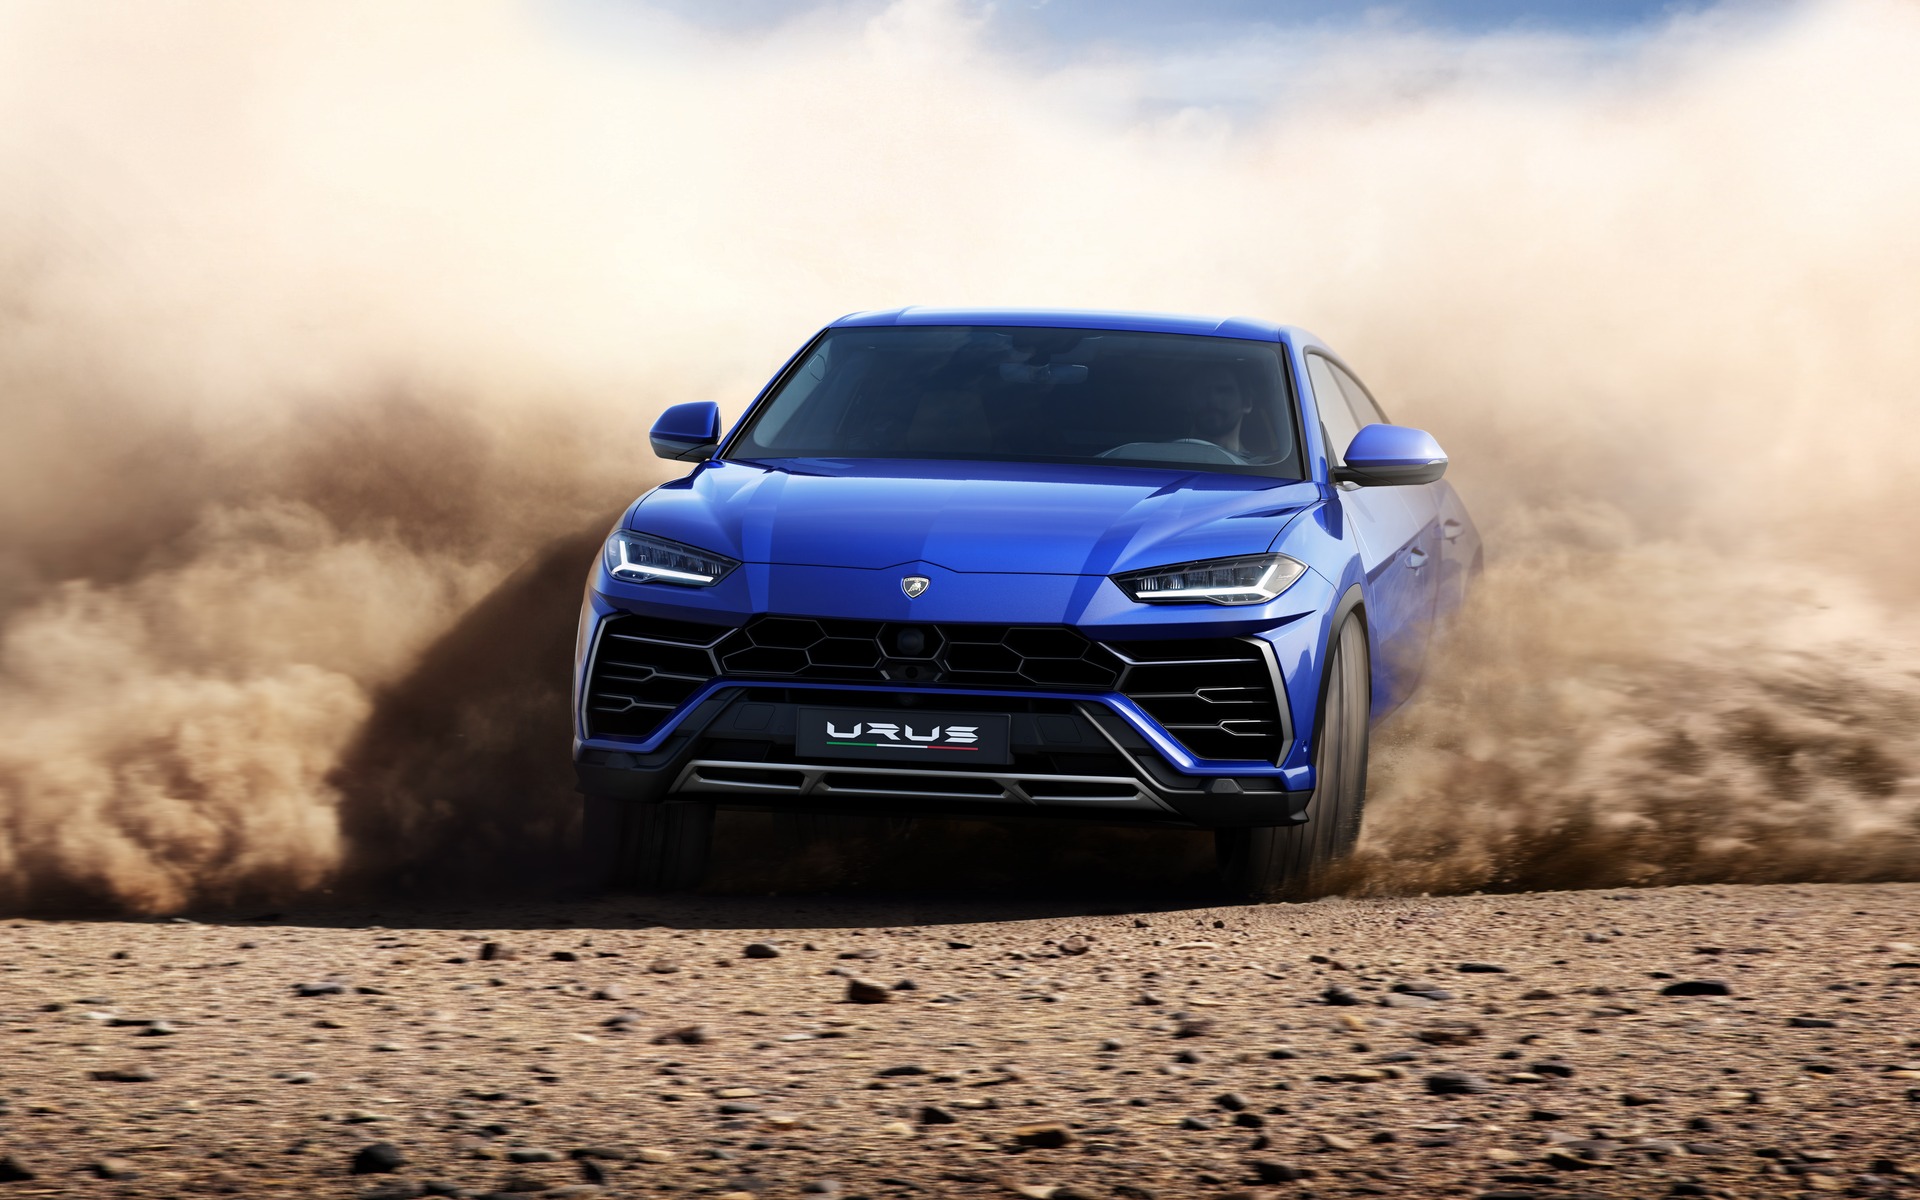 5 Things You Need to Know about the Lamborghini Urus